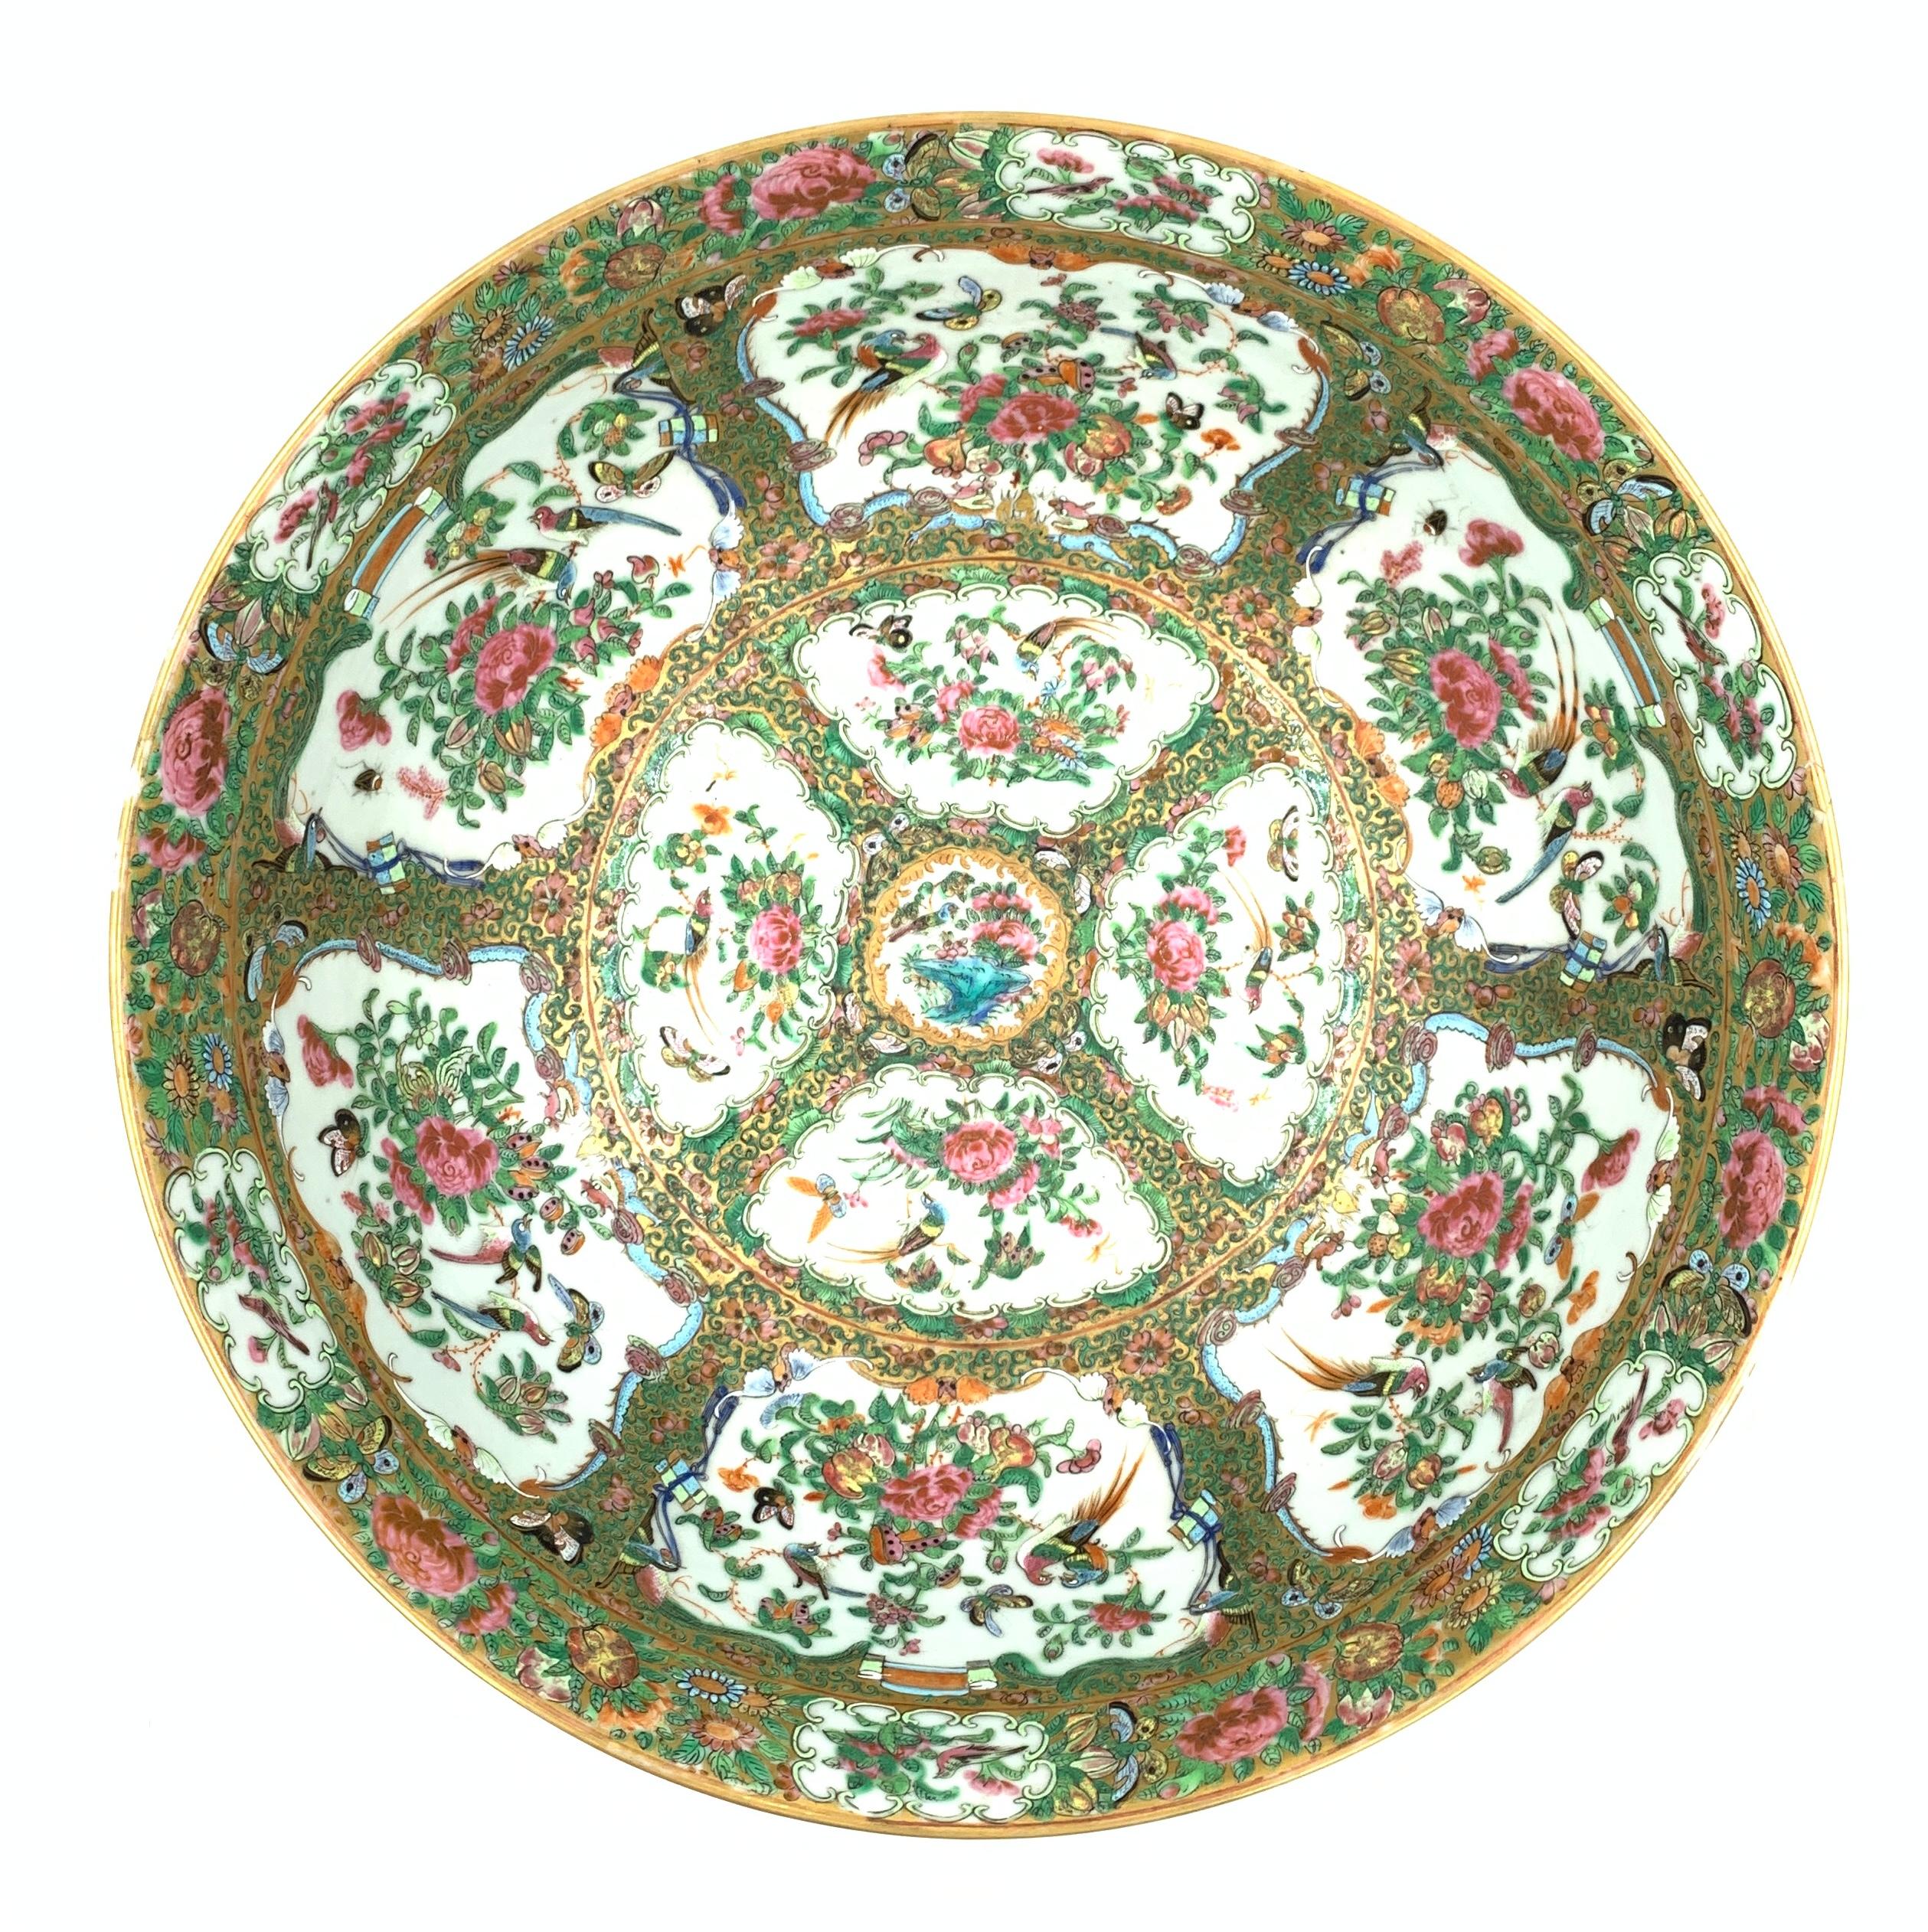 19th century Chinese famille rose porcelain bowl, decorated with butterflies, flowers and birds.